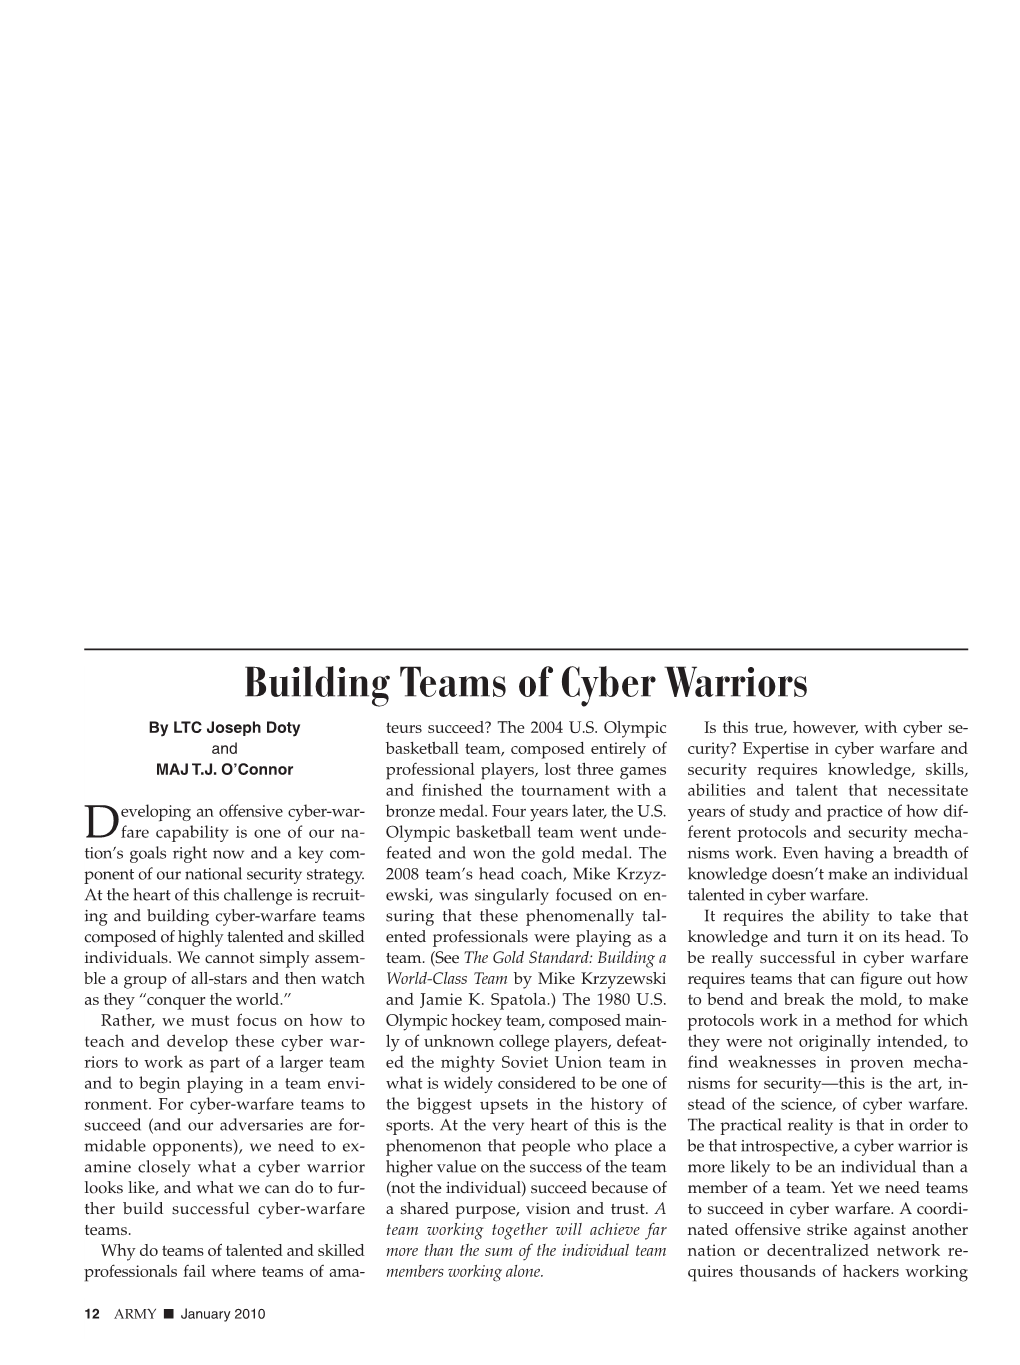 Building Teams of Cyber Warriors by LTC Joseph Doty Teurs Succeed? the 2004 U.S